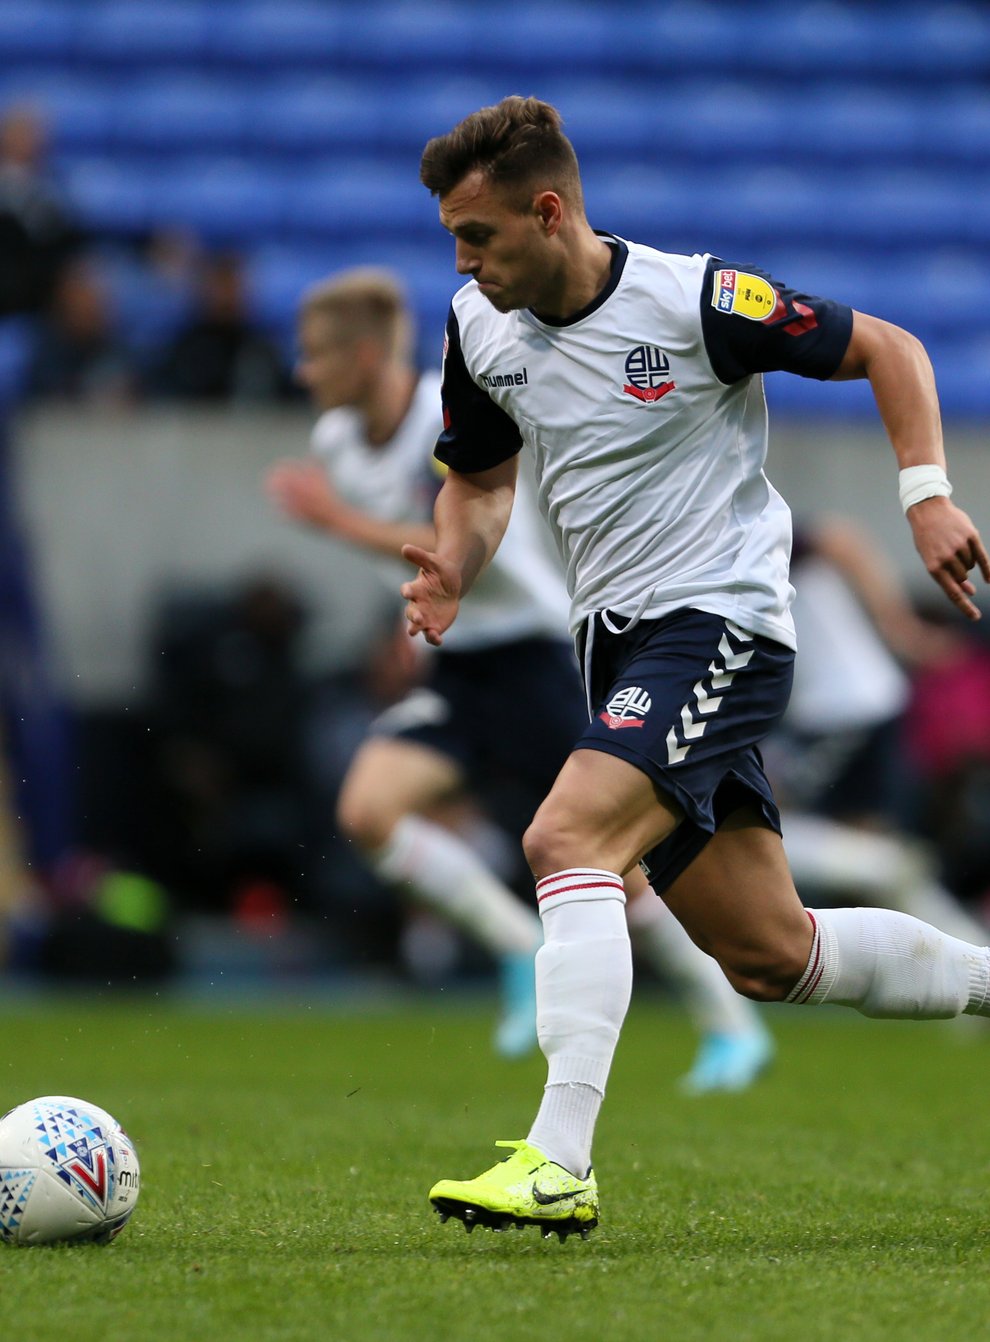 On-loan Bolton winger Dennis Politic was on target in Port Vale’s win (Richard Sellers/PA)